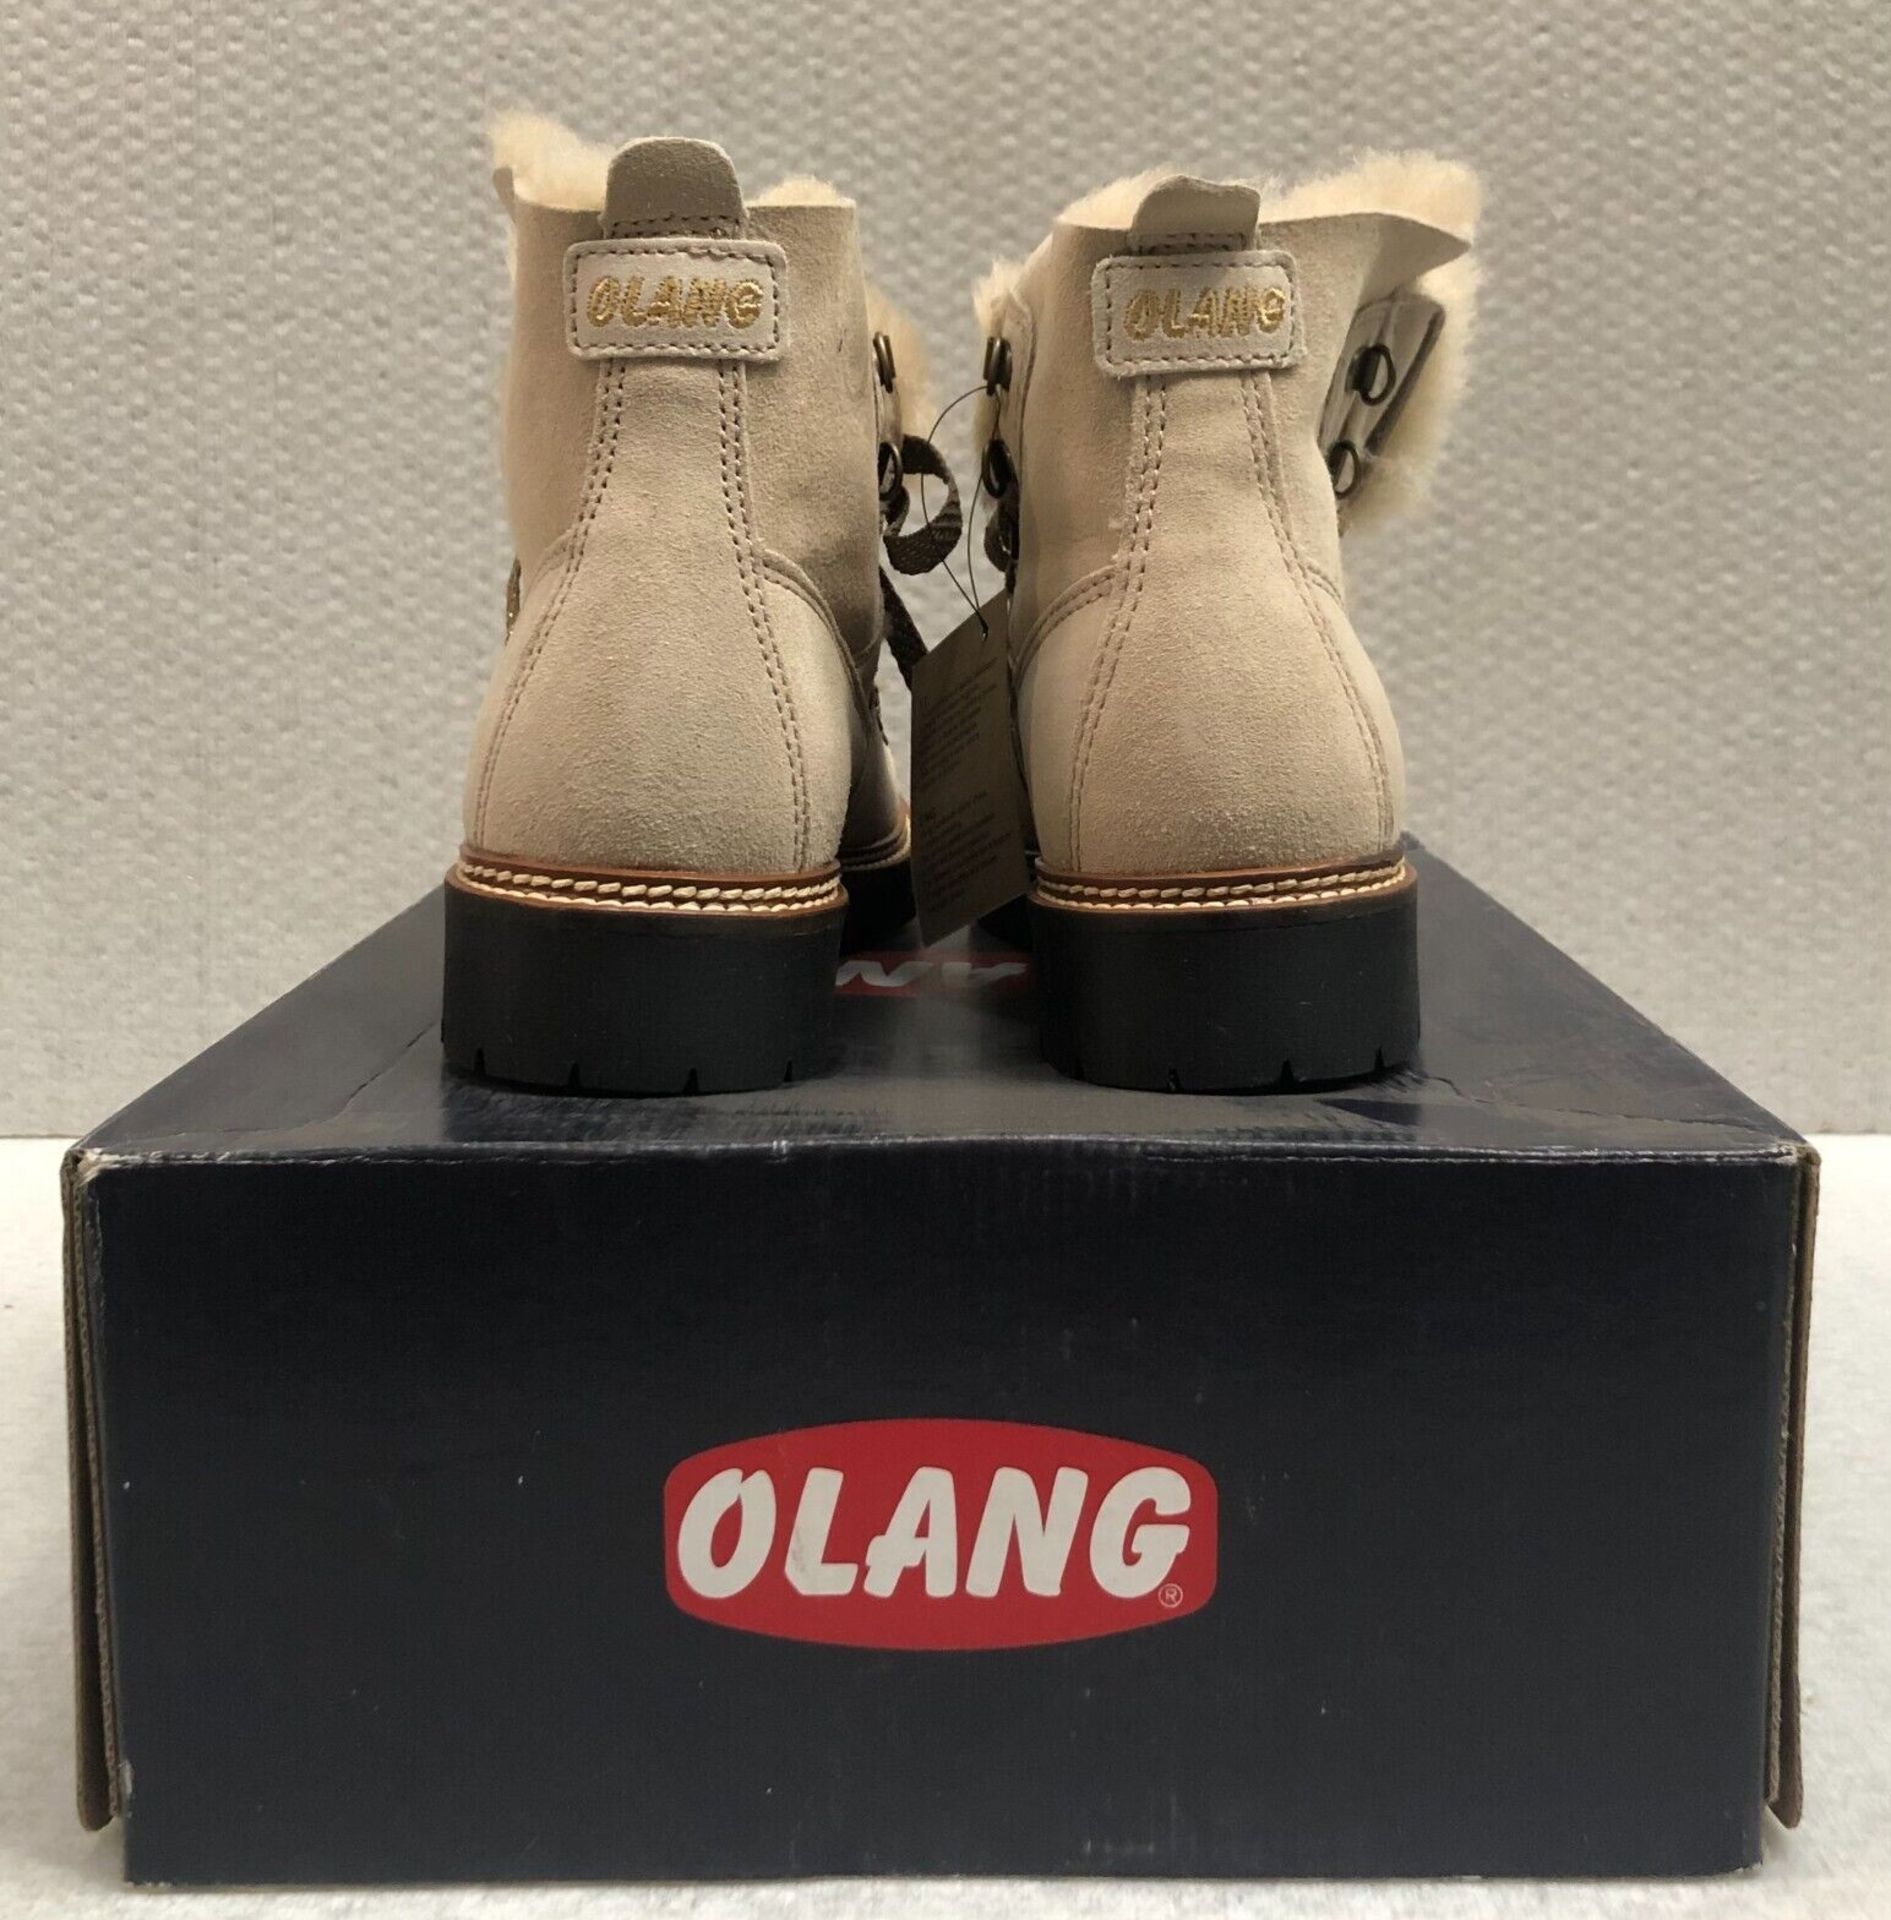 1 x Pair of Designer Olang Women's Winter Boots - Aurora.Lux 88 Beige - Euro Size 39 - New Boxed - Image 2 of 6